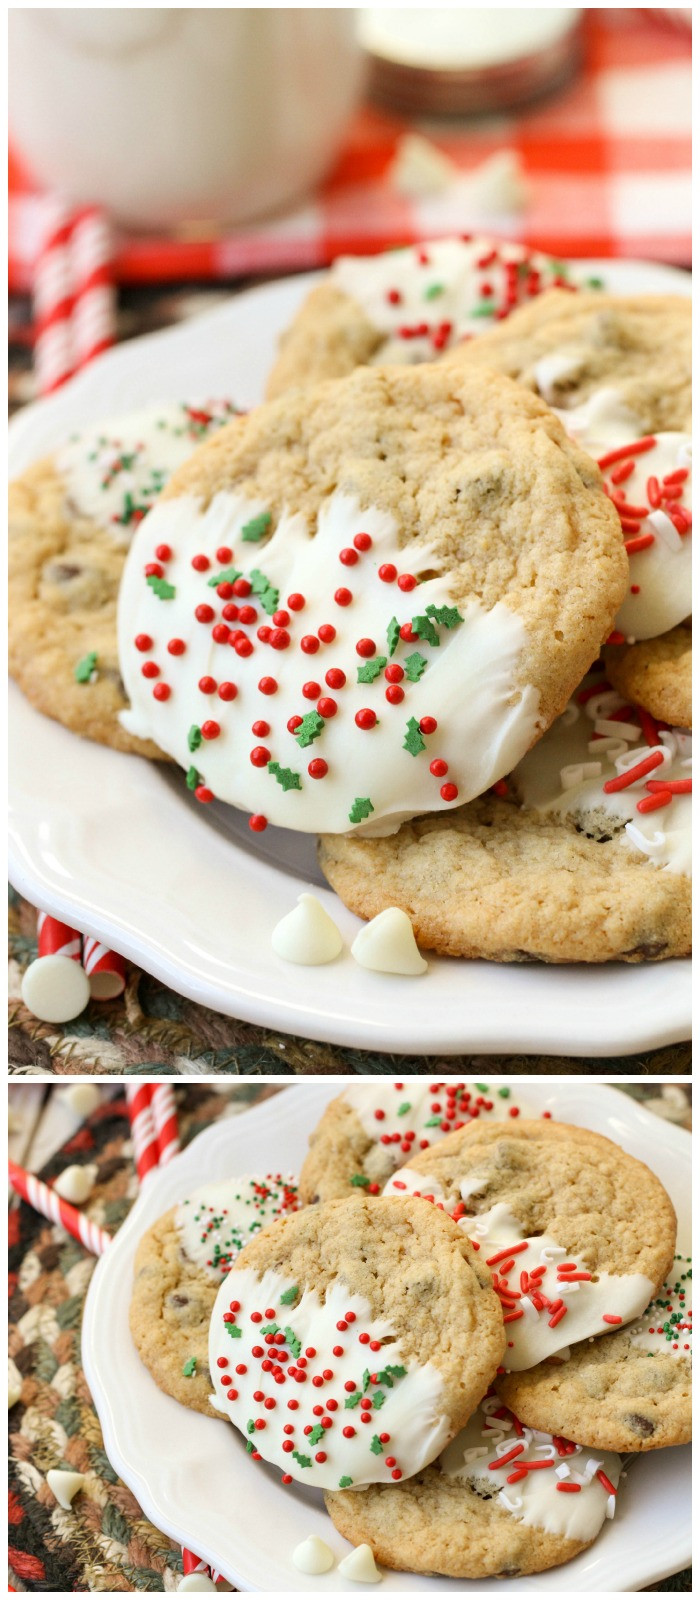 Delicious Christmas Cookies
 Chocolate Chip Christmas Cookies